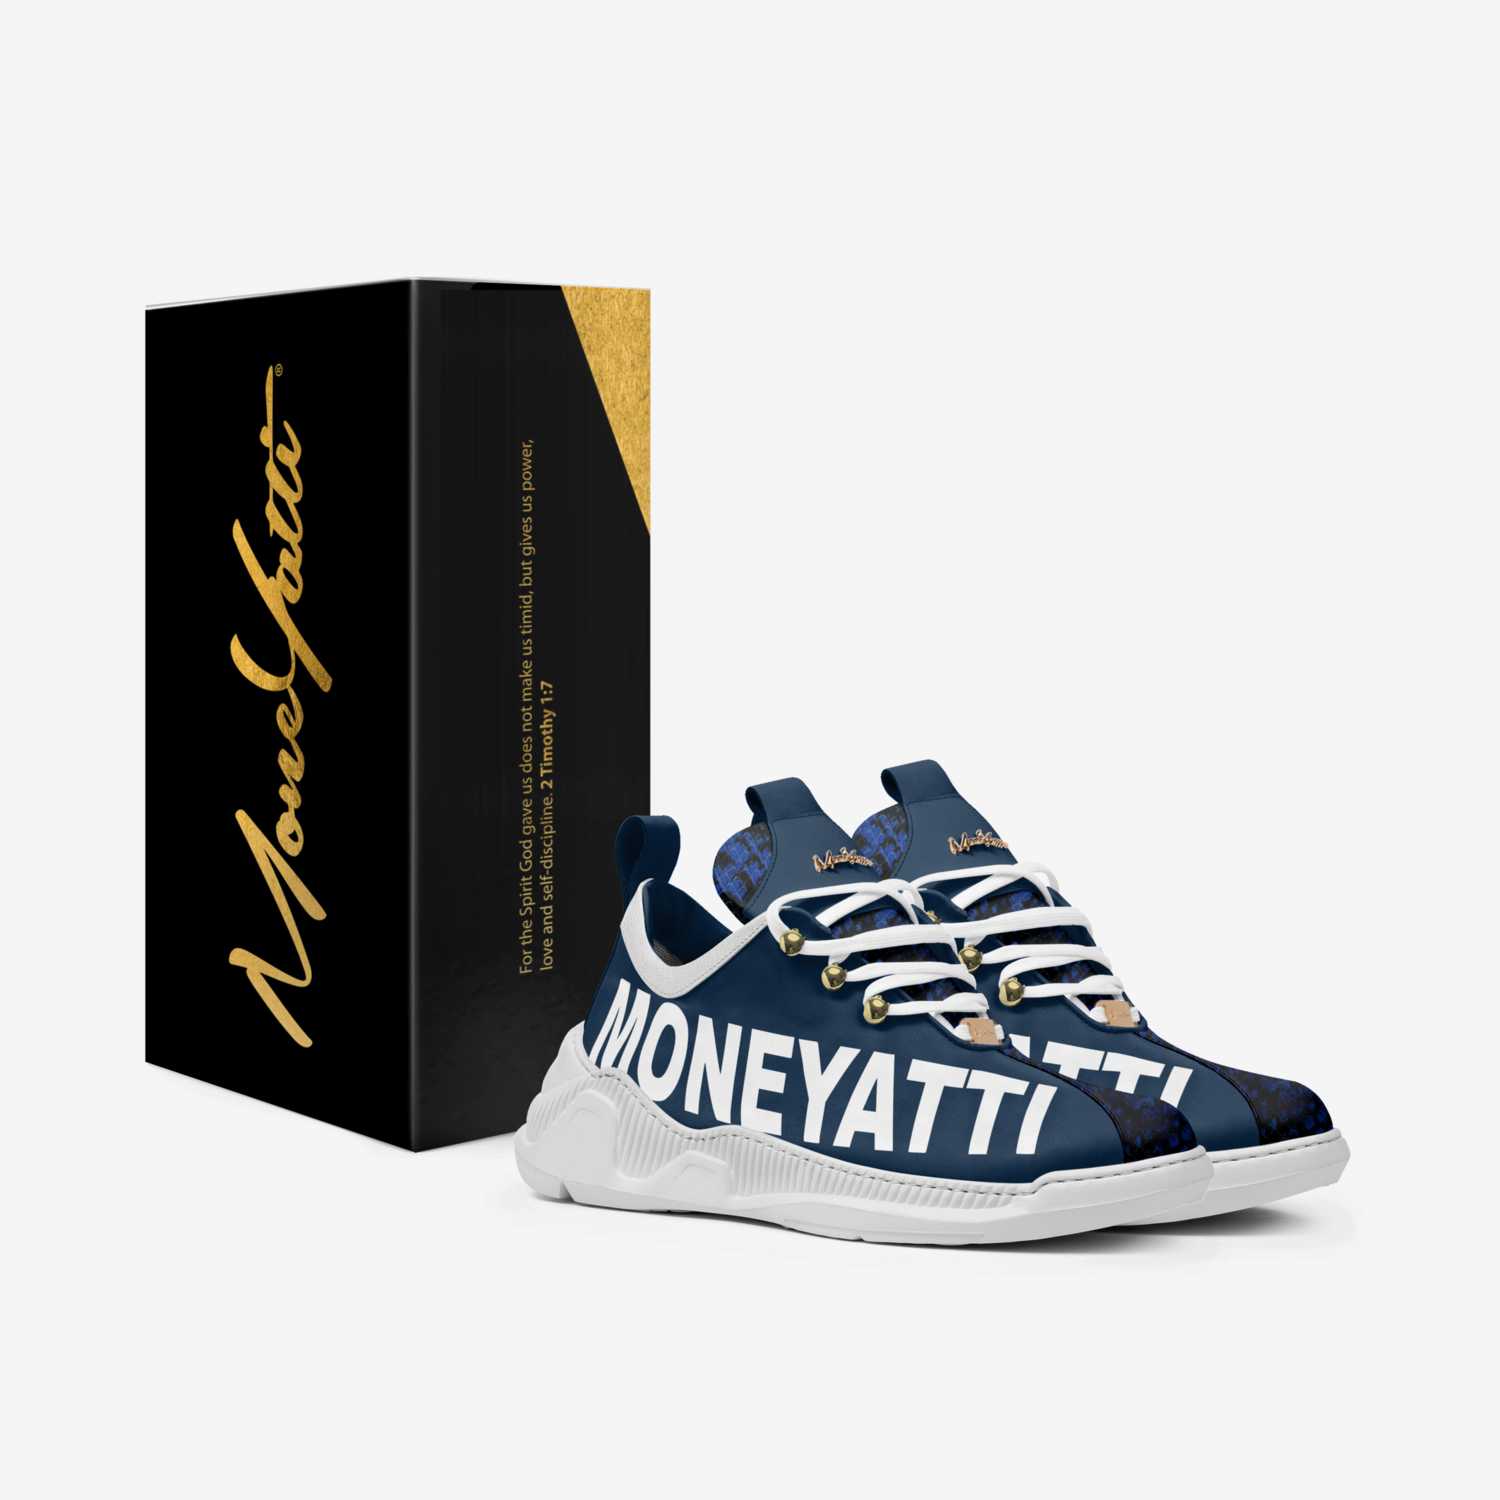 Sig22 custom made in Italy shoes by Moneyatti Brand | Box view